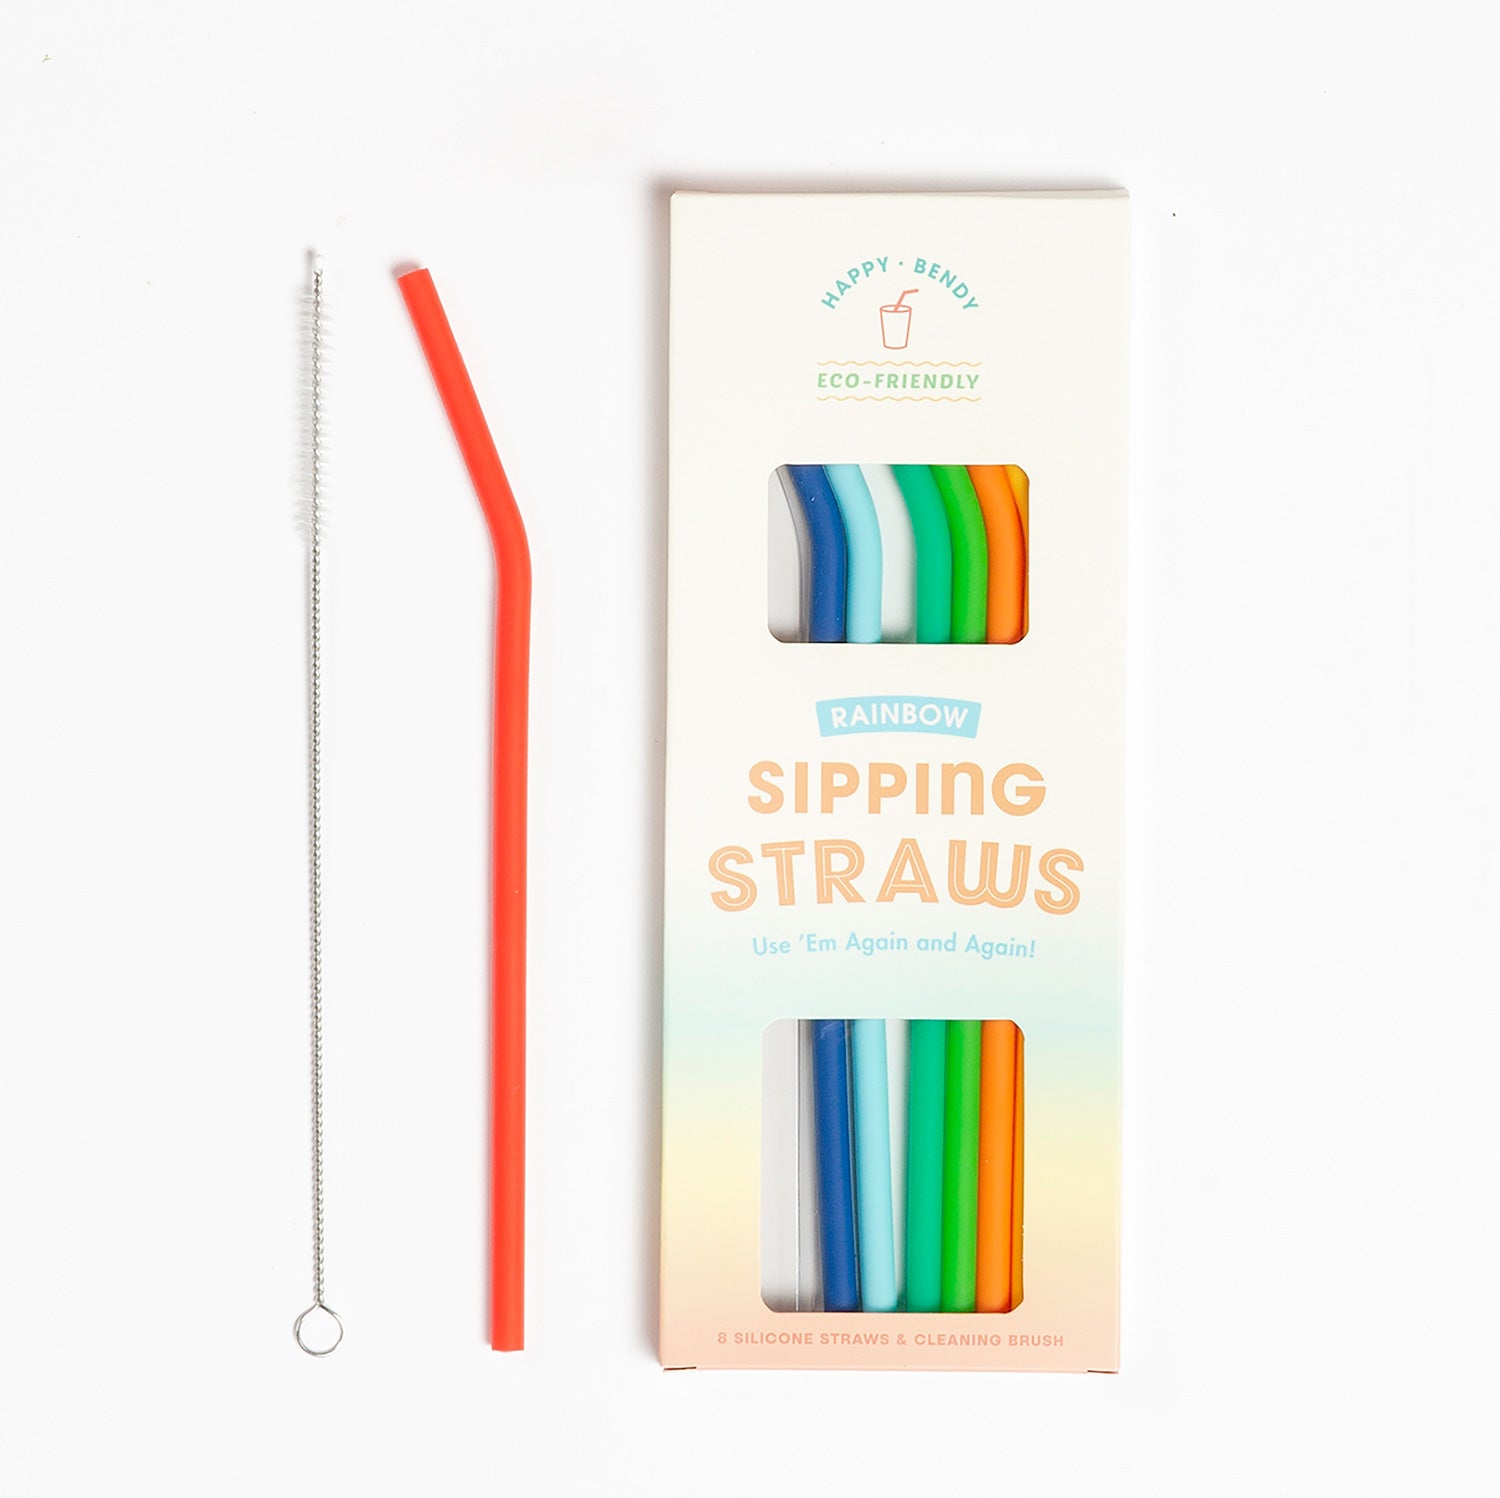 2pcs/set Silicone Straw Cover, Cute Rainbow Design Straw Cap For Party